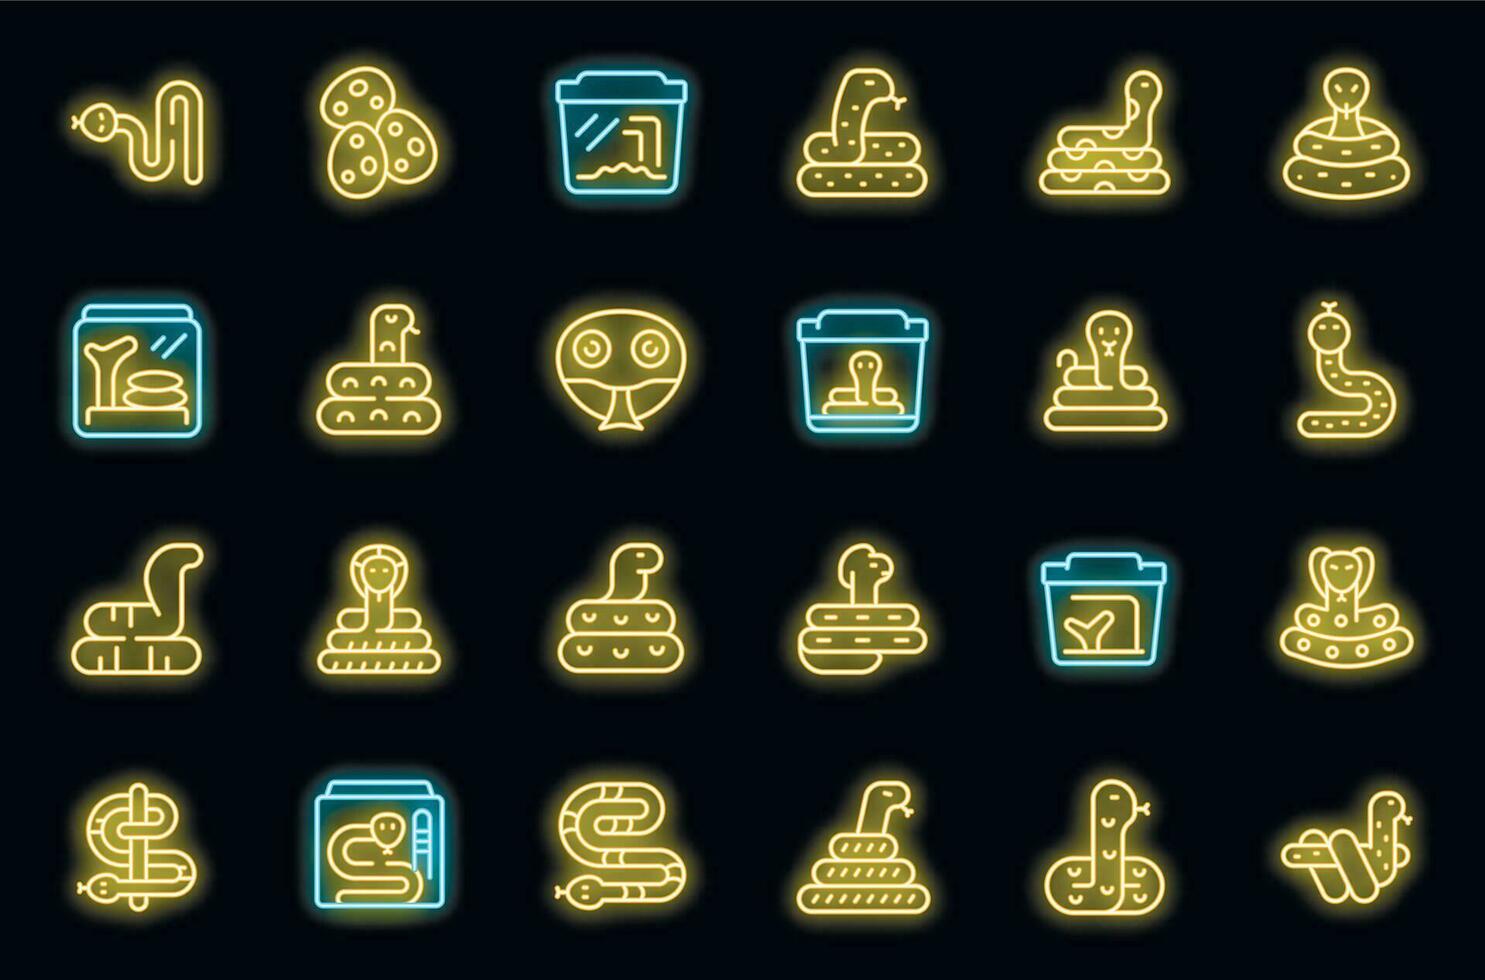 Snake pet icons set vector neon